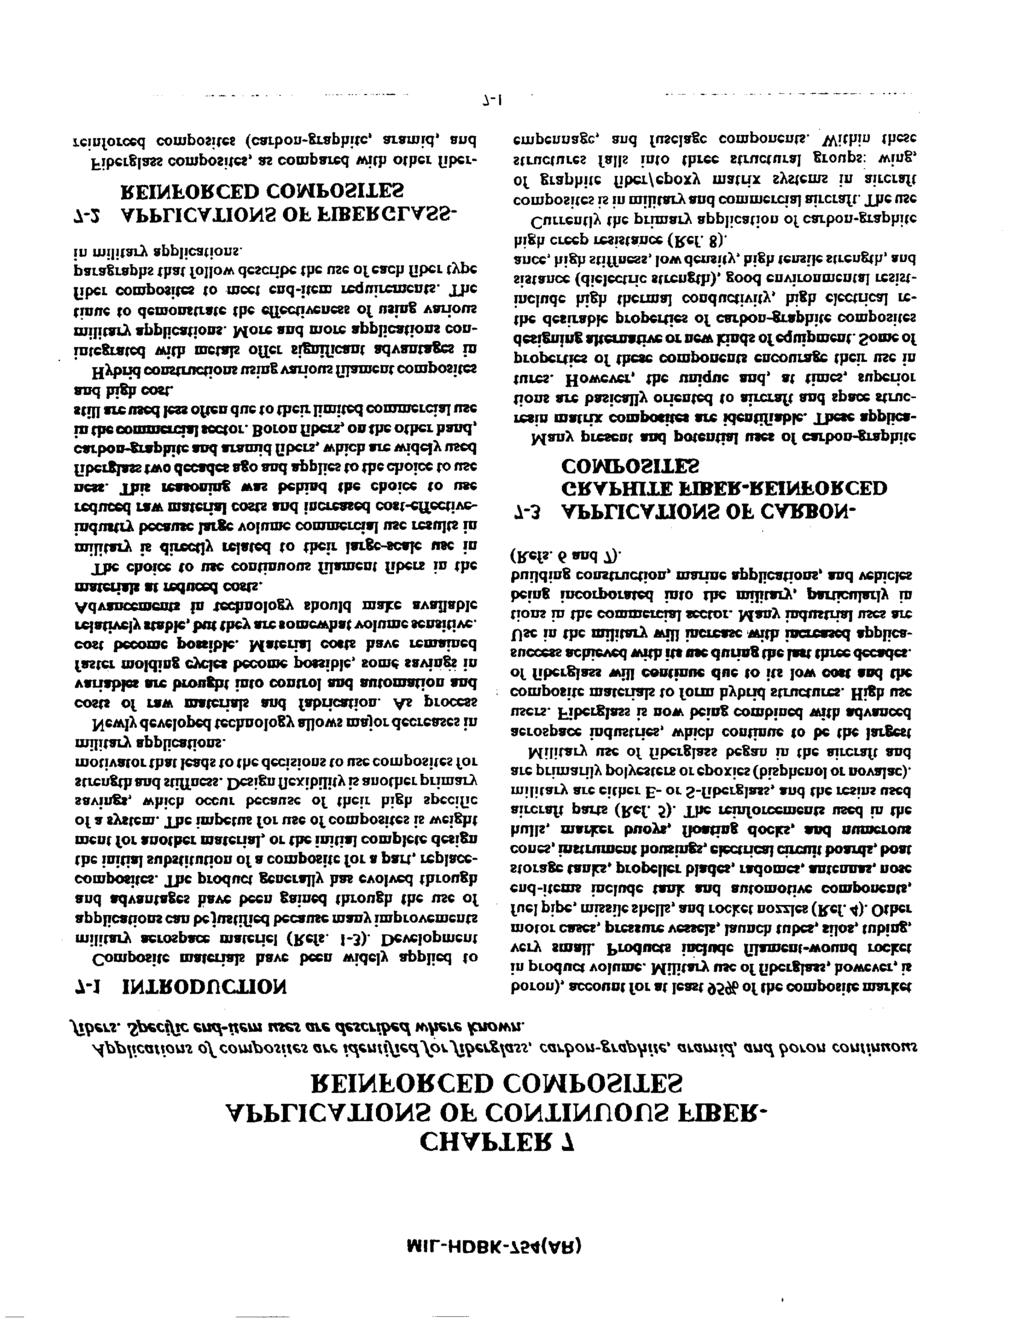 ML-HDBK-754(AR) CHAPTER 7 APPLCATONS OF CONTNUOUS F5ER- RENFORCED COMPOSTES Applications of composites are identified Jorjlberglass, carbon-graphite, aramid, and boron continuous fibers.